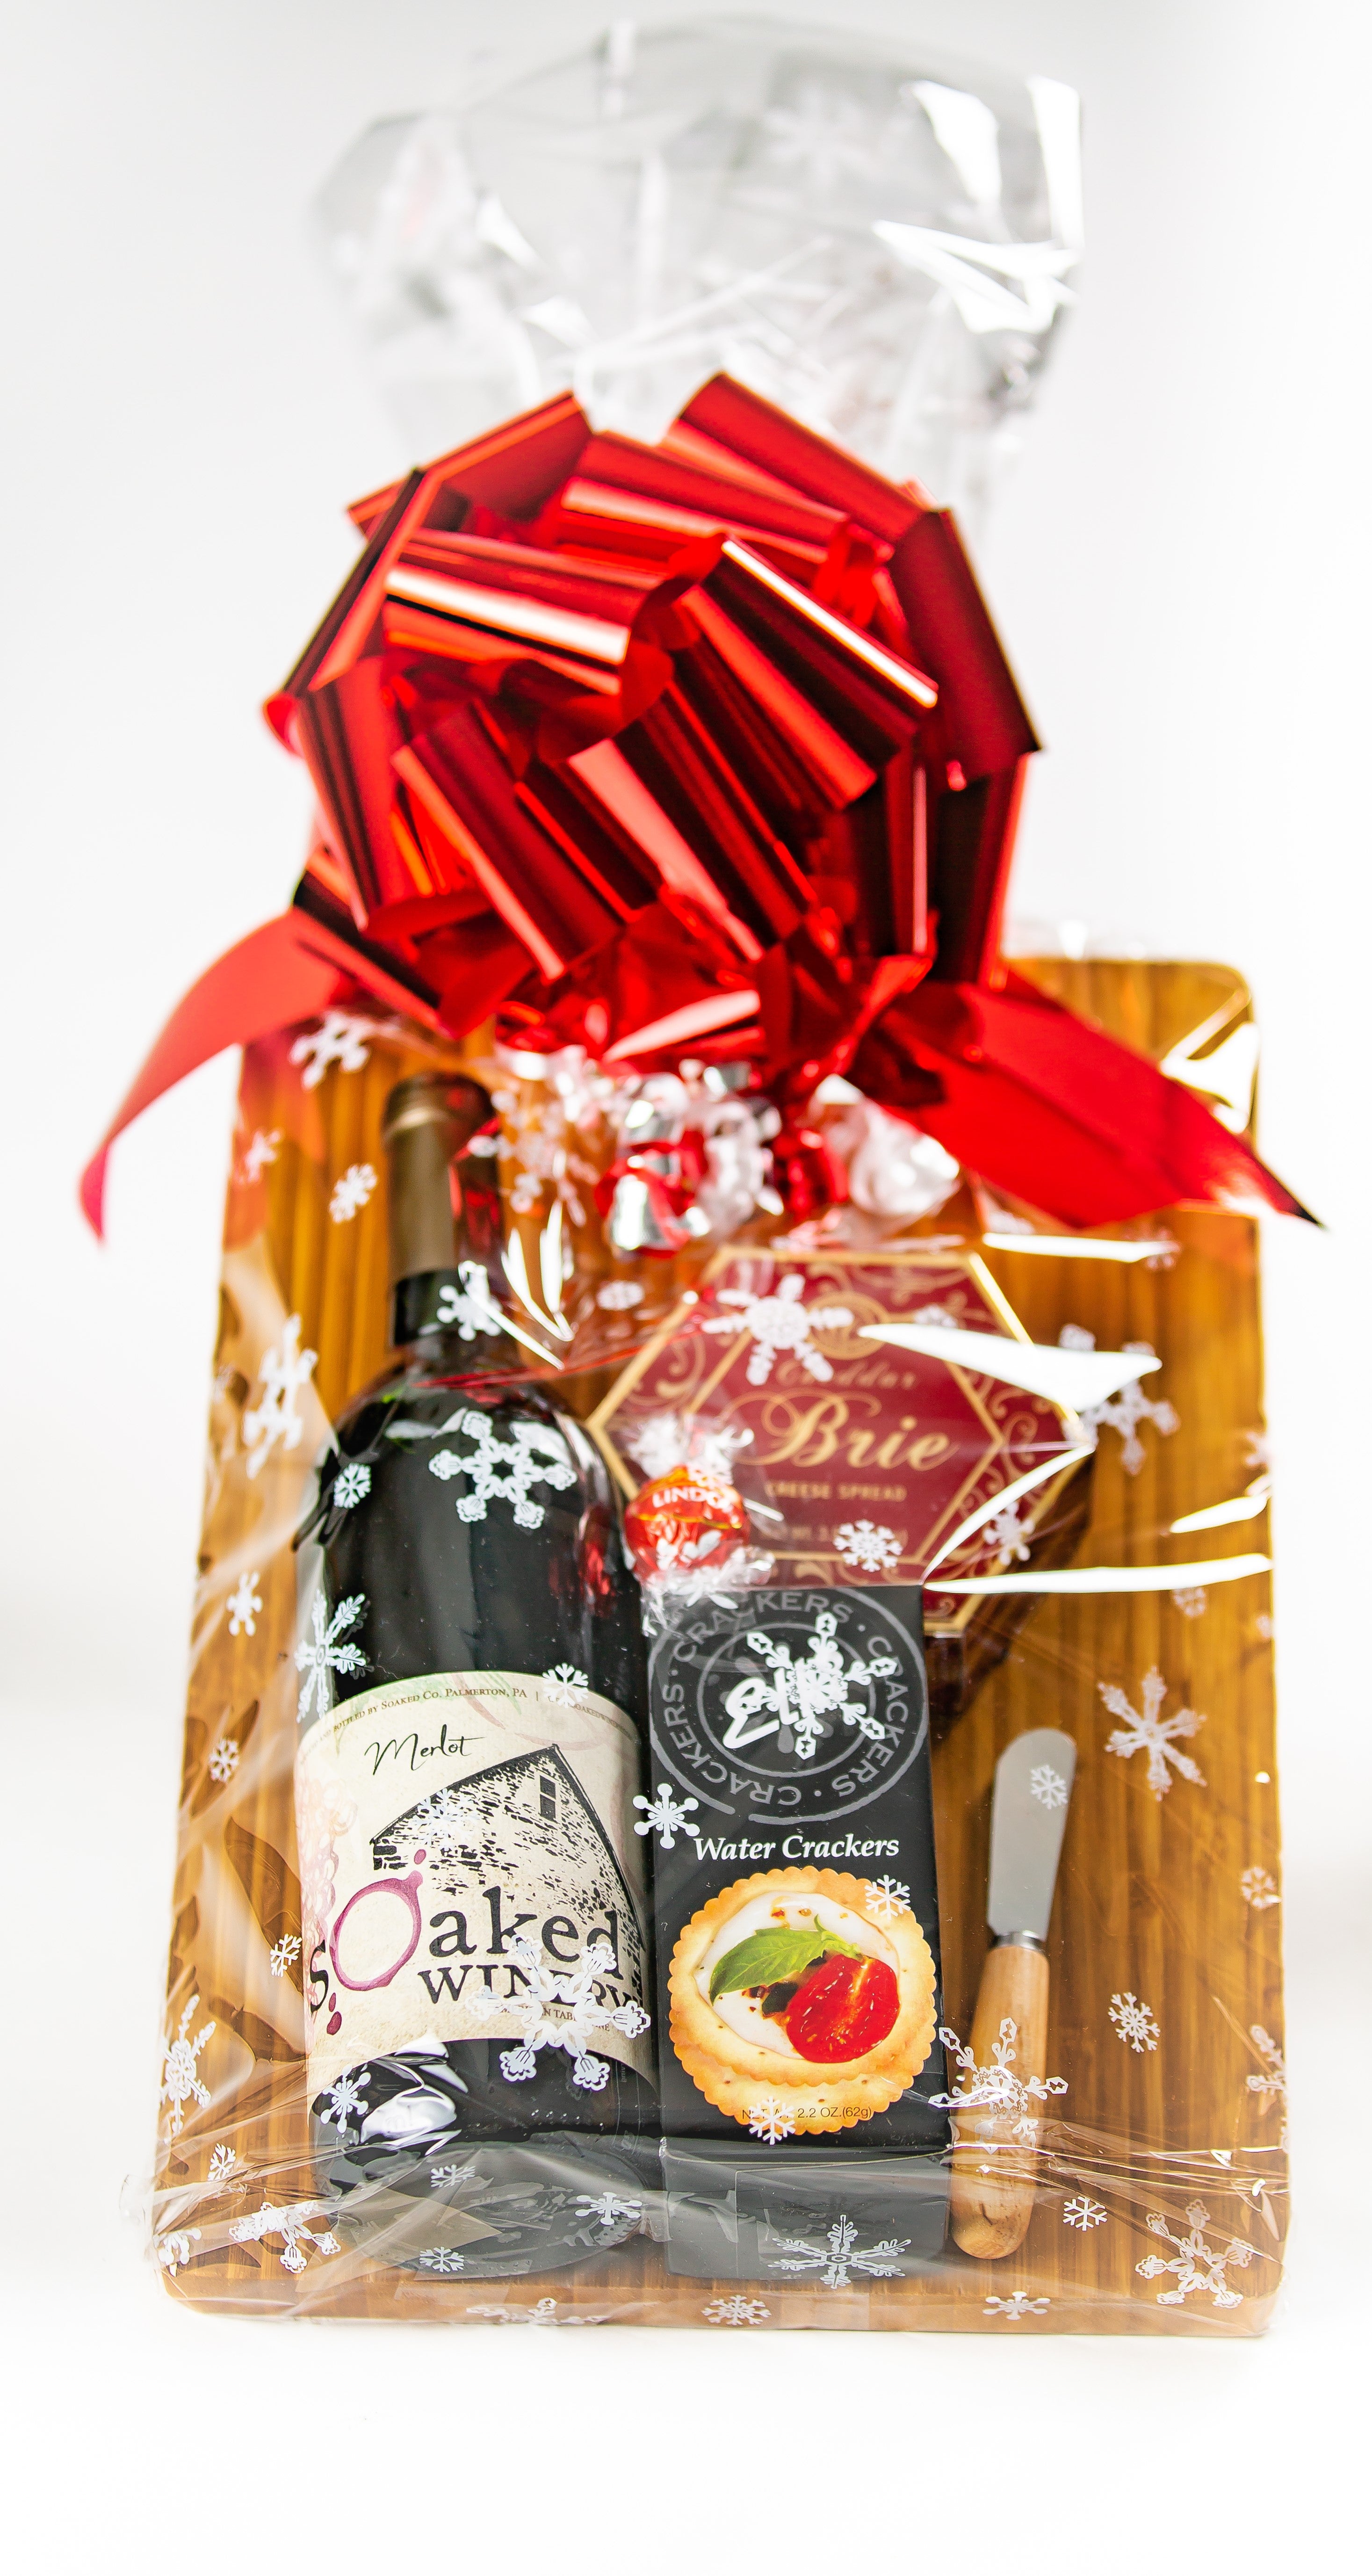 Enter to win a Holiday Kitchen Gift Basket!